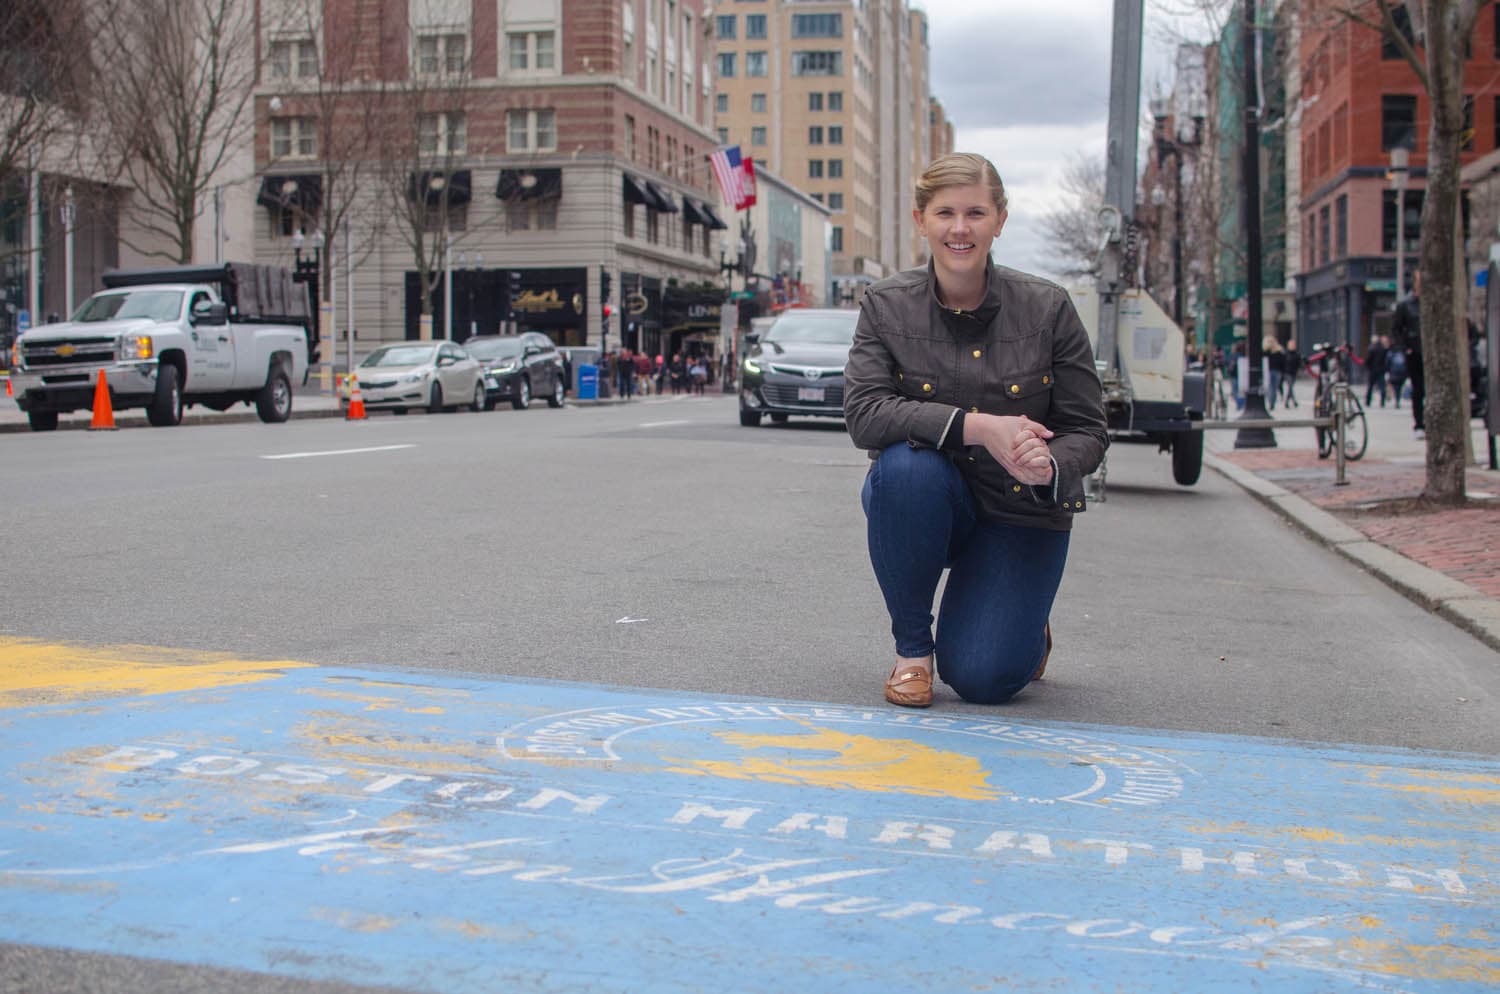 Meghan Connors kneels at the finish line of the Boston Marathon on Boylston Street. This year she's running her fifth Boston Marathon, supporting the MGH Pediatric Oncology division where she was treated for neuroblastoma when she was three years old. (Sharon Brody/WBUR)